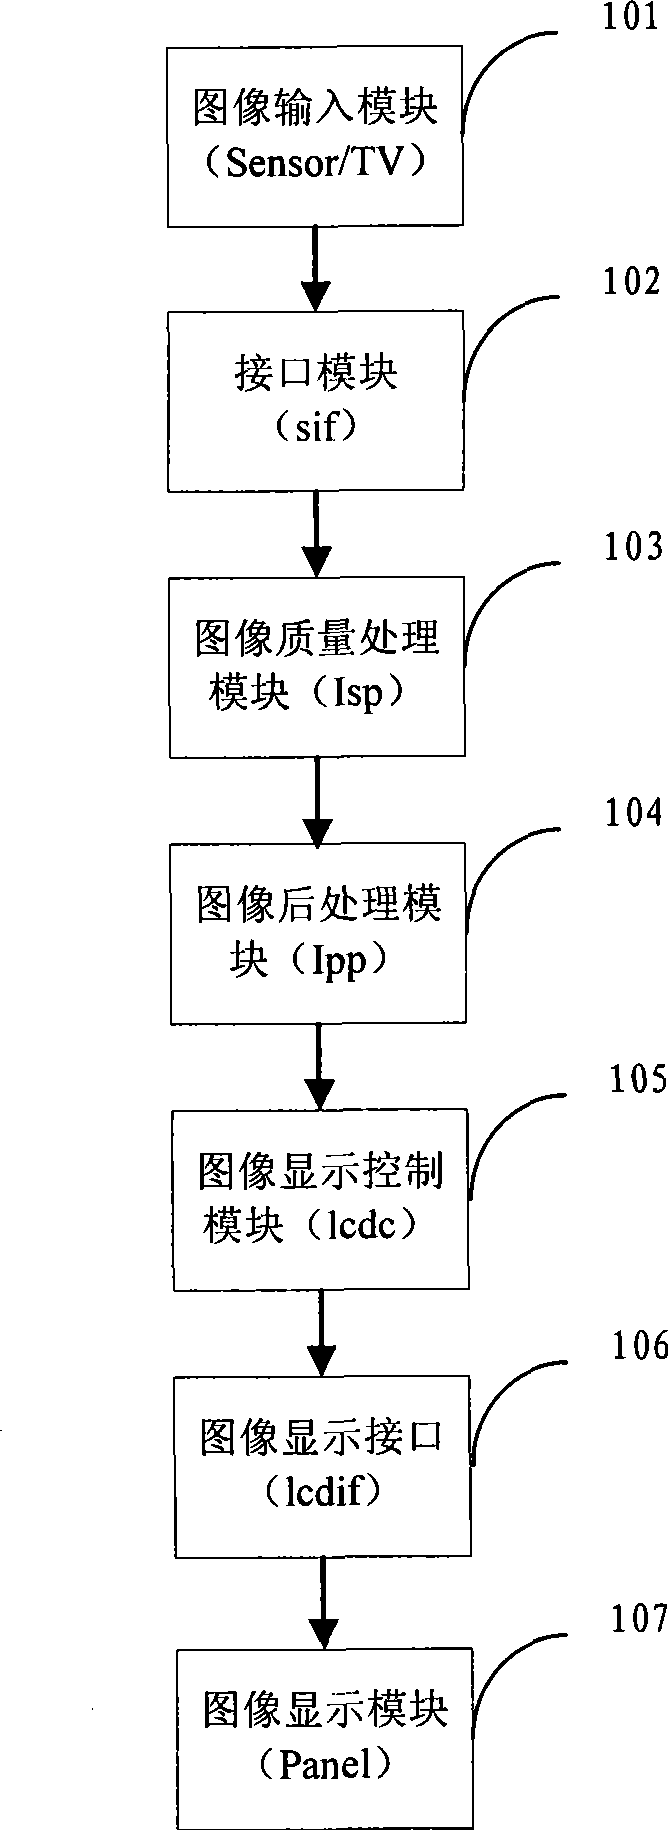 Method and apparatus for correcting data error in image processing system